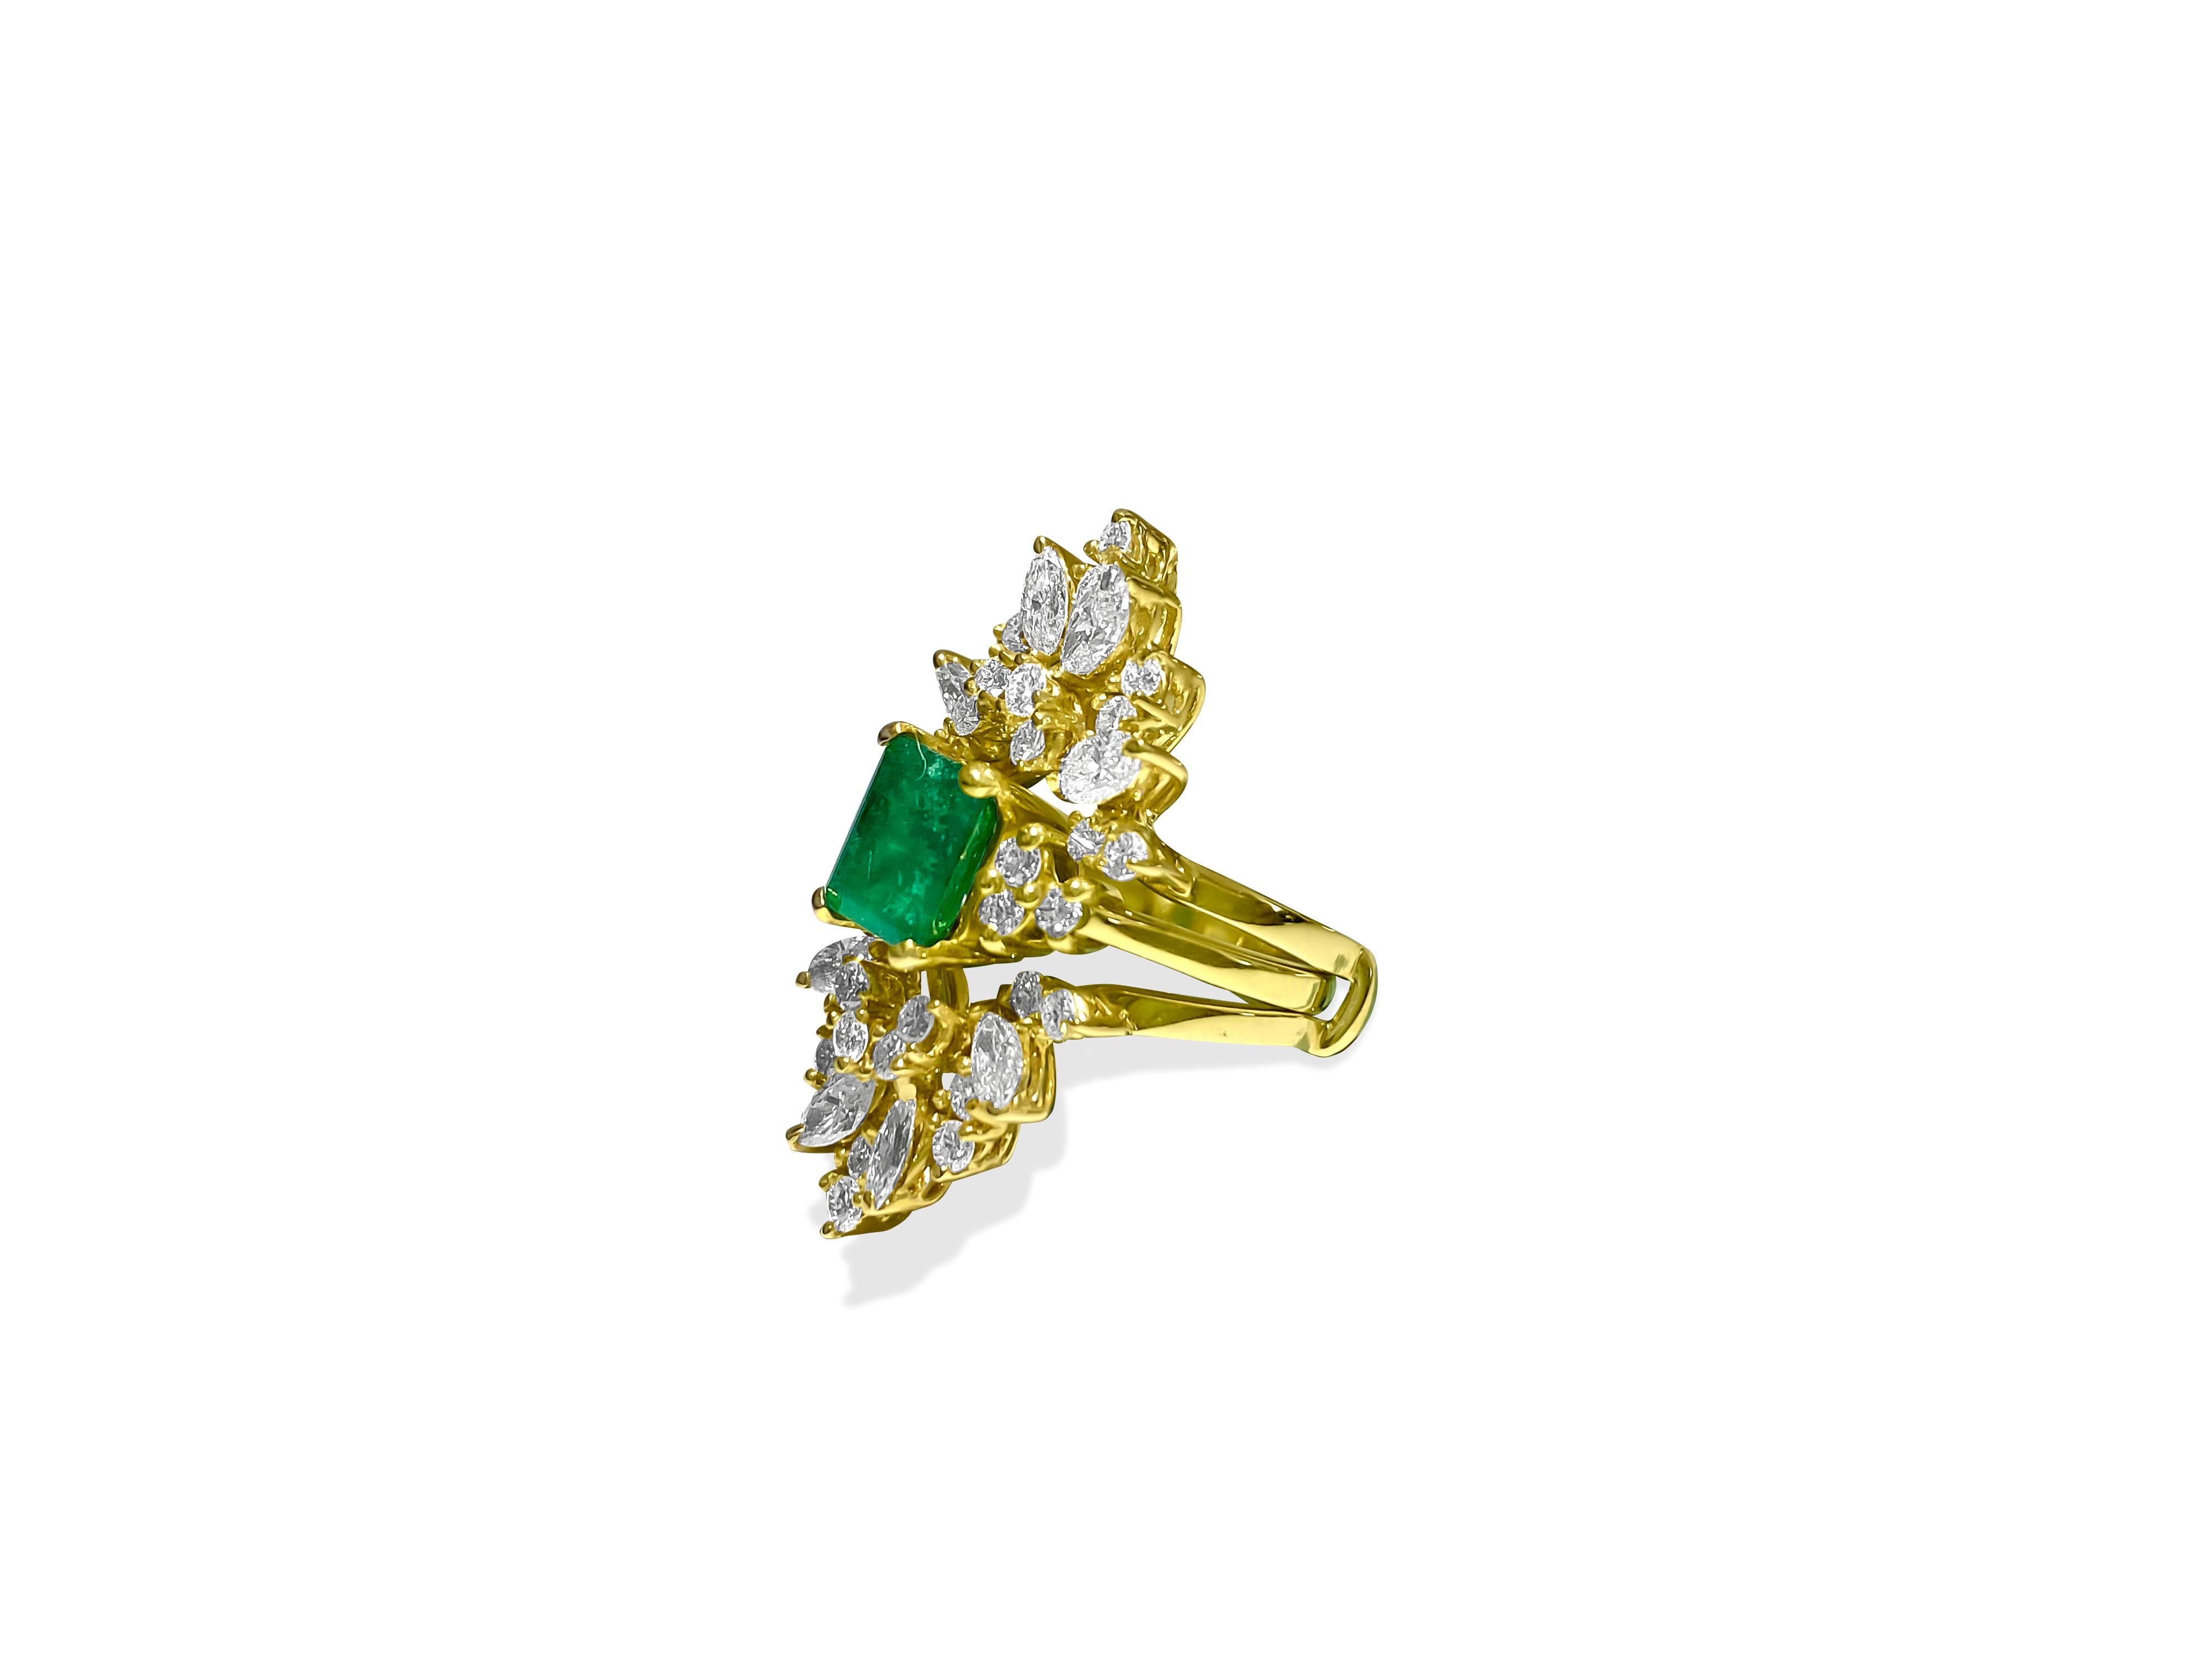 Metal: 14K Yellow gold. 
2.25 carat diamonds. VS clarity and F color. Round brilliant cut and marquise cut. 100% natural earth mined diamonds. 
2.00 carat natural Emerald. 100% natural earth mined emerald. 
Emerald cut emerald set in prongs.